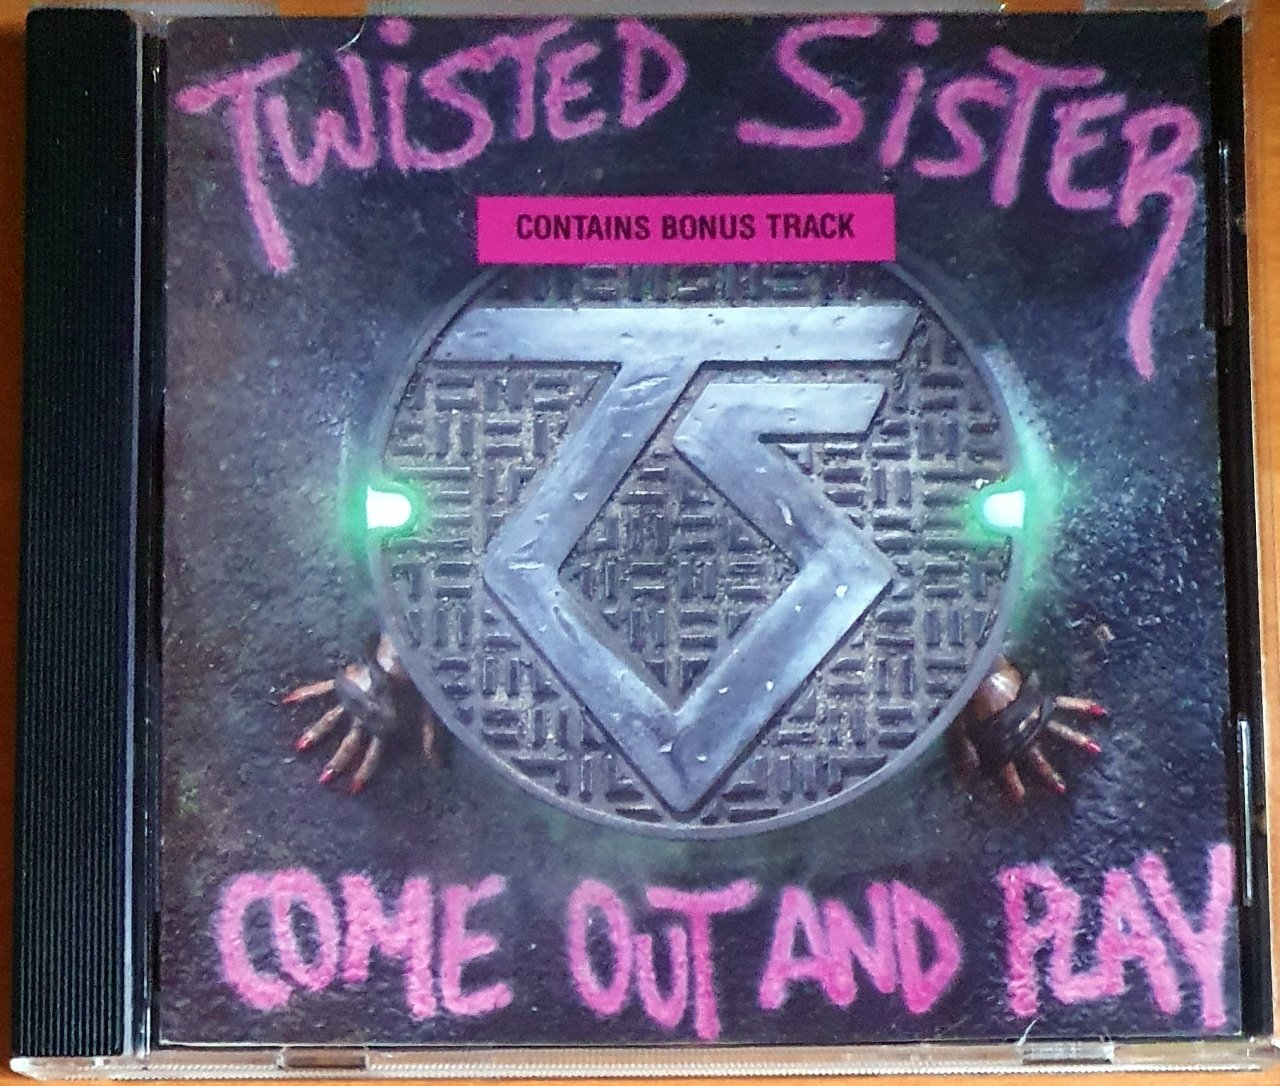 TWISTED SISTER - COME OUT AND PLAY (1985) - CD 2.EL